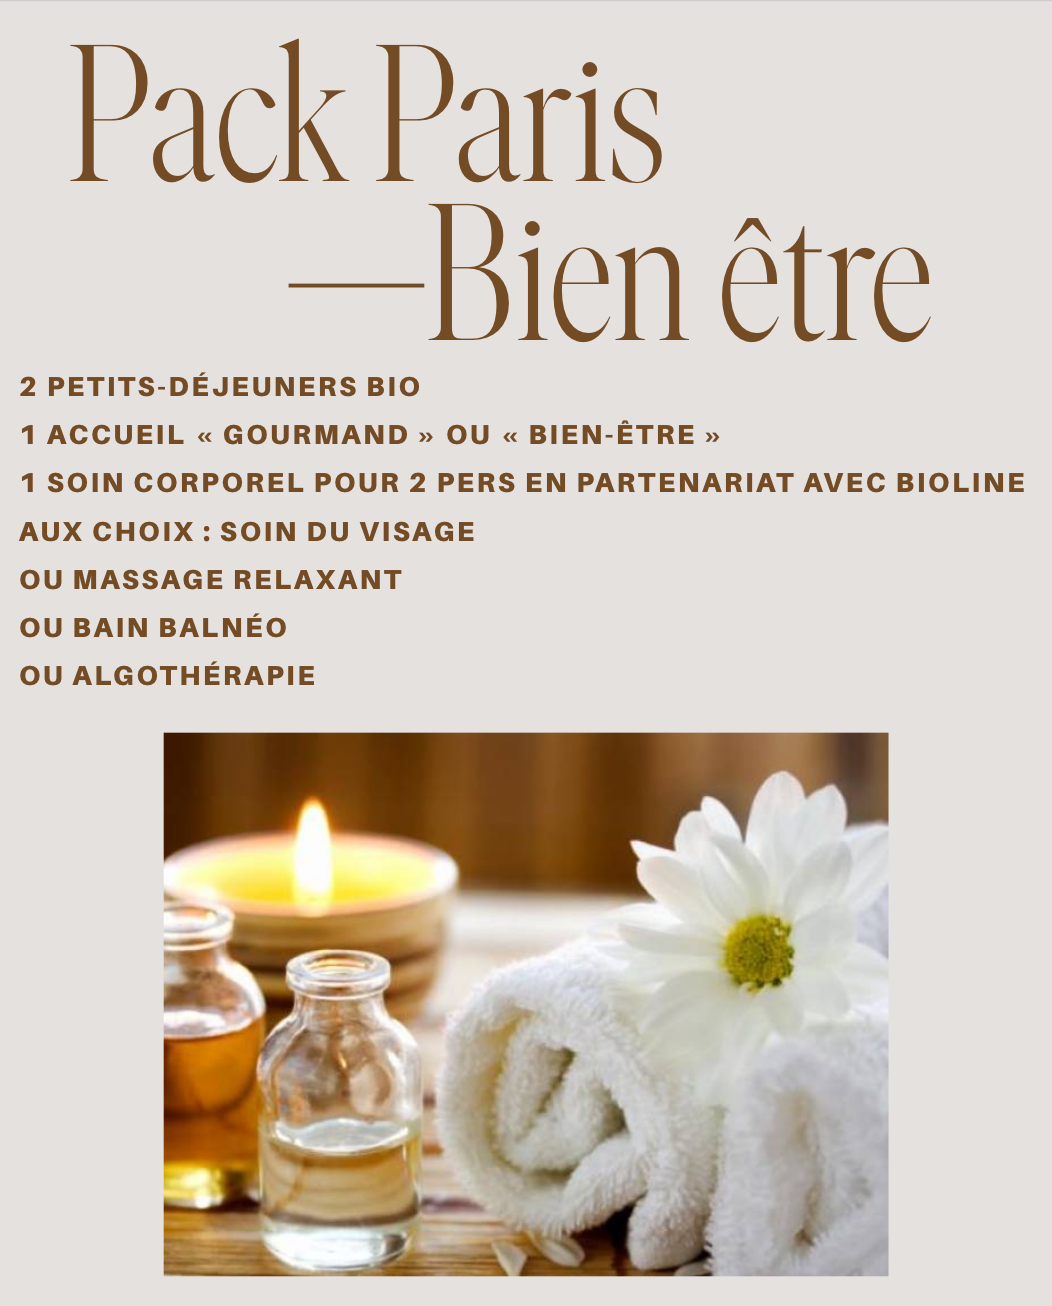 Our Wellness Paris Package